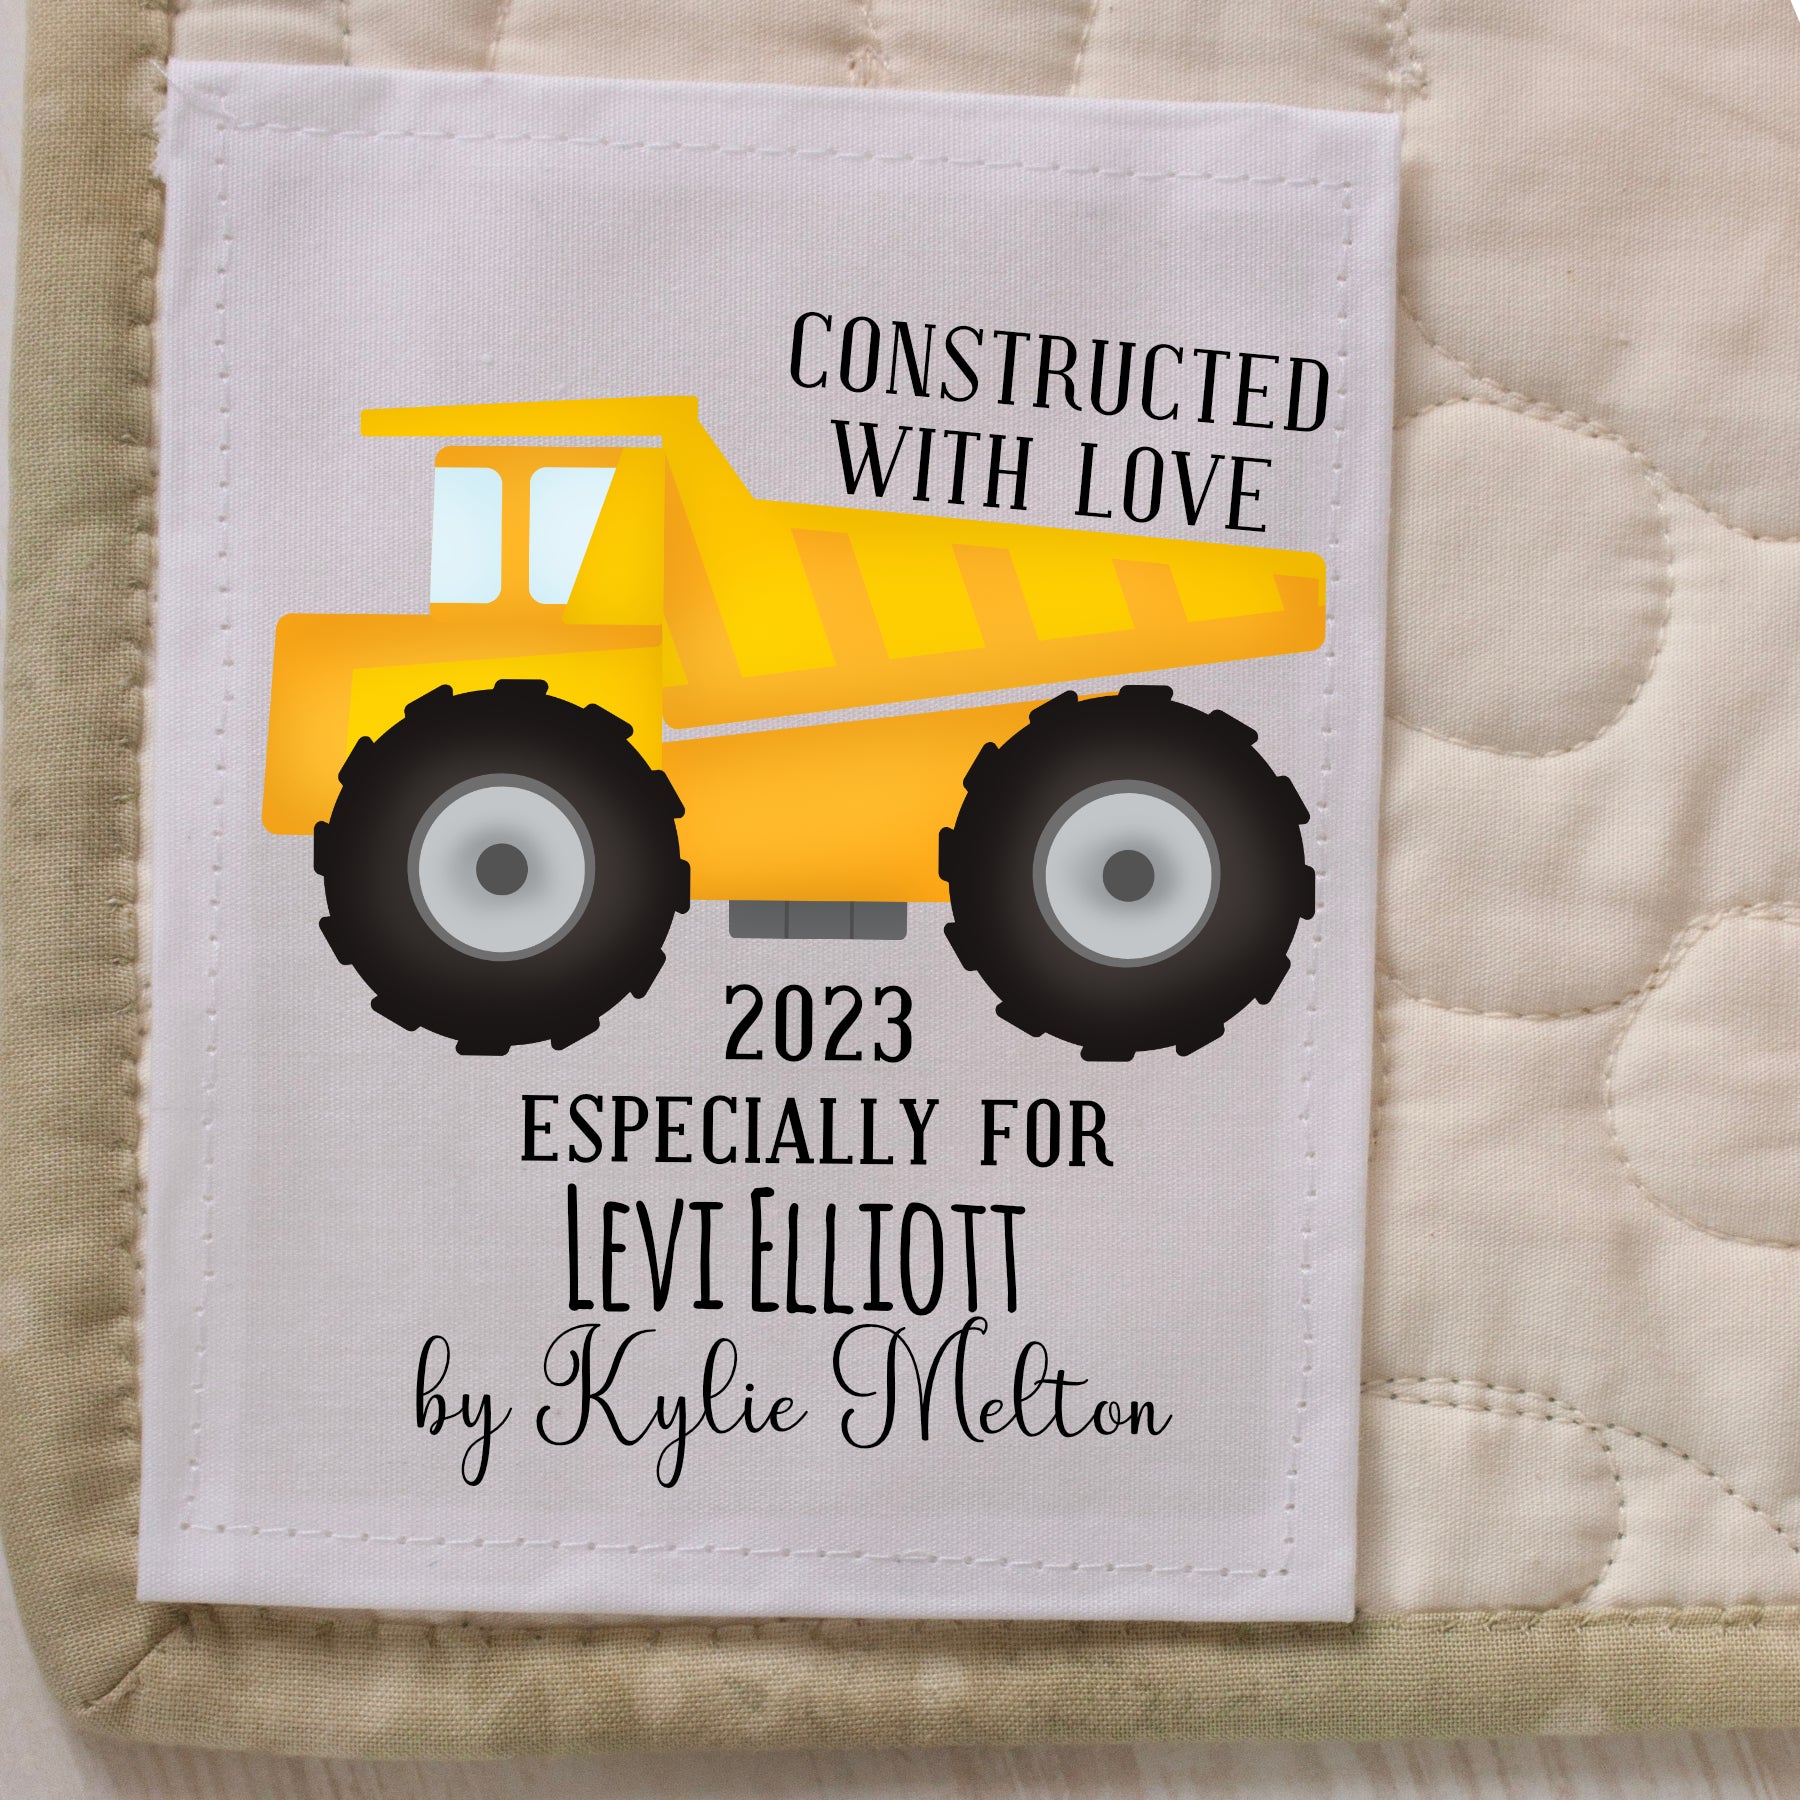 Constructed with Love. Construction theme quilt label for babies and kids - Jammin Threads